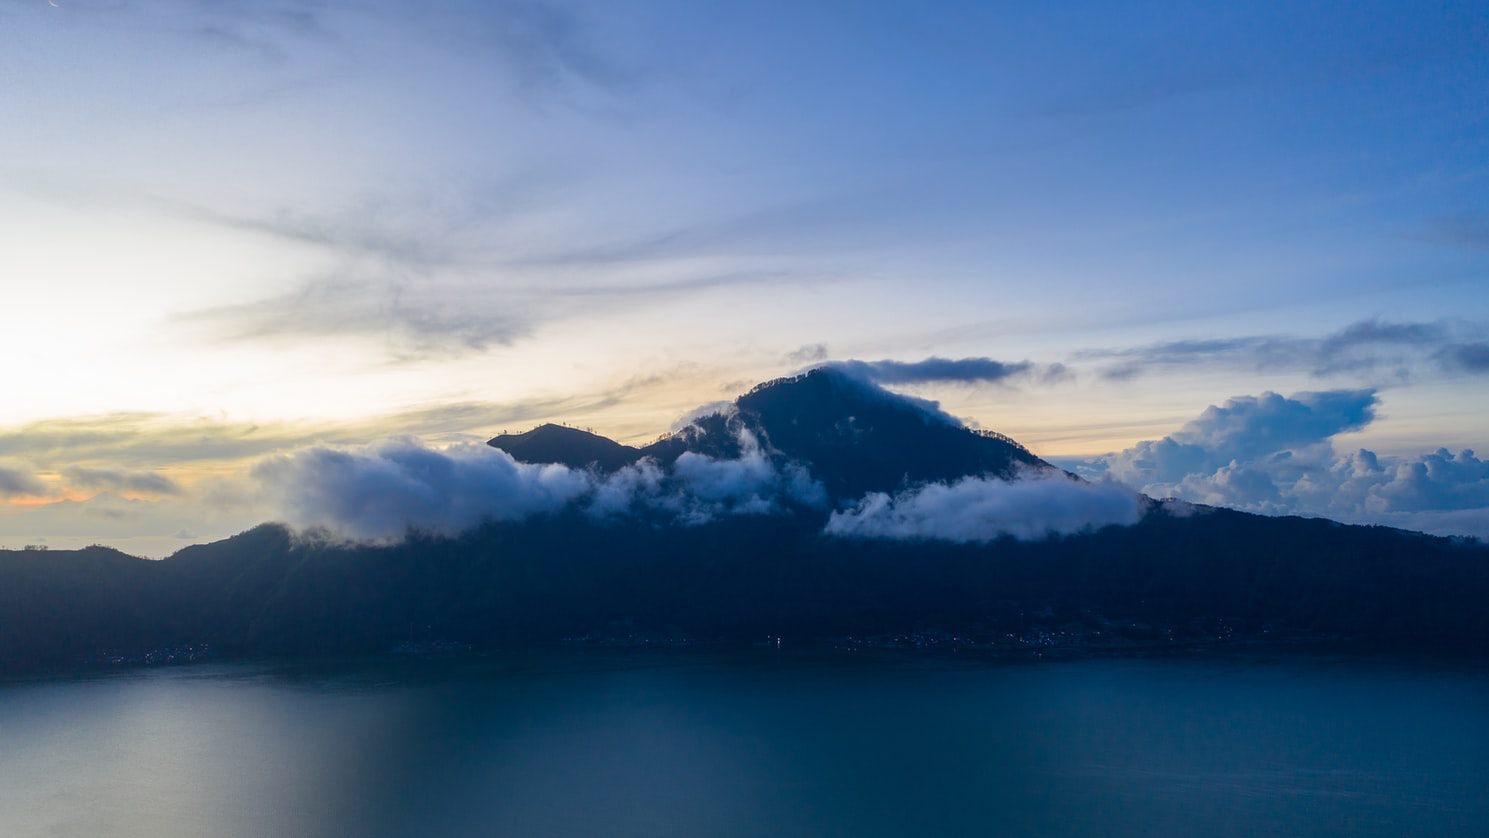 A day trip to capture Mount Batur with a professional photographer is a must do activity in BAli